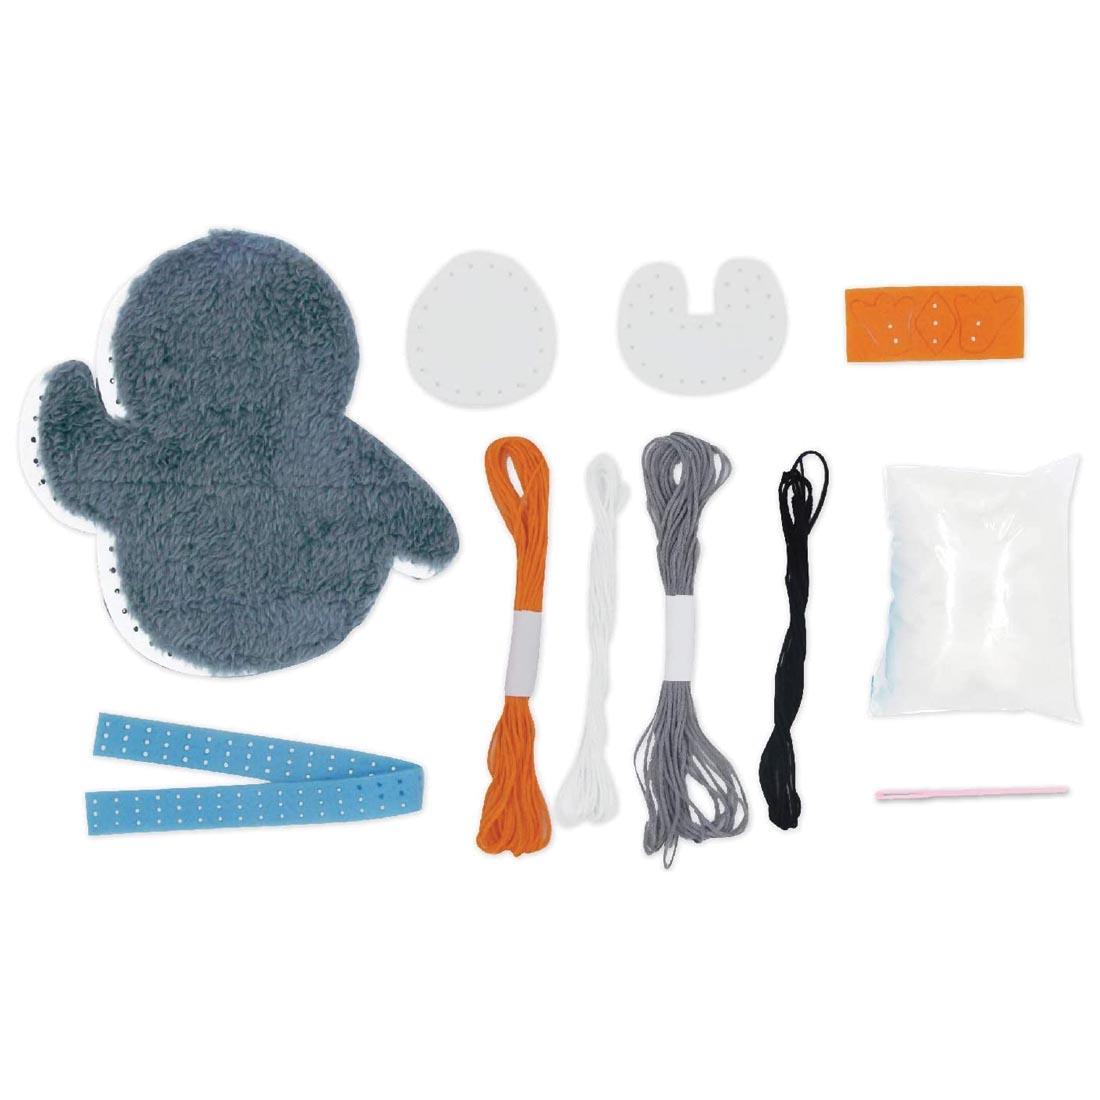 Contents of the Penguin Sewing Kit by Avenir